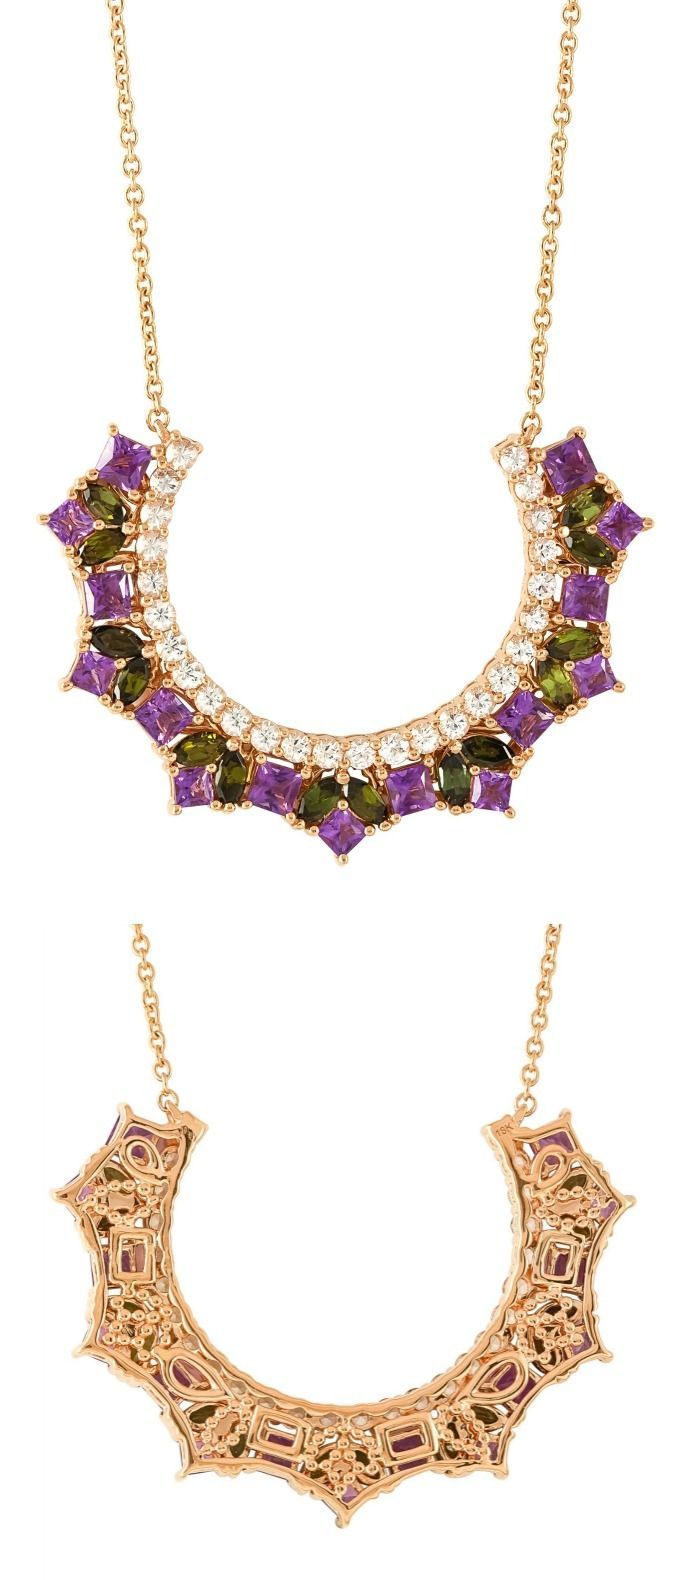 The Lira necklace by Ayva jewelry, with gemstones and diamonds in gold.